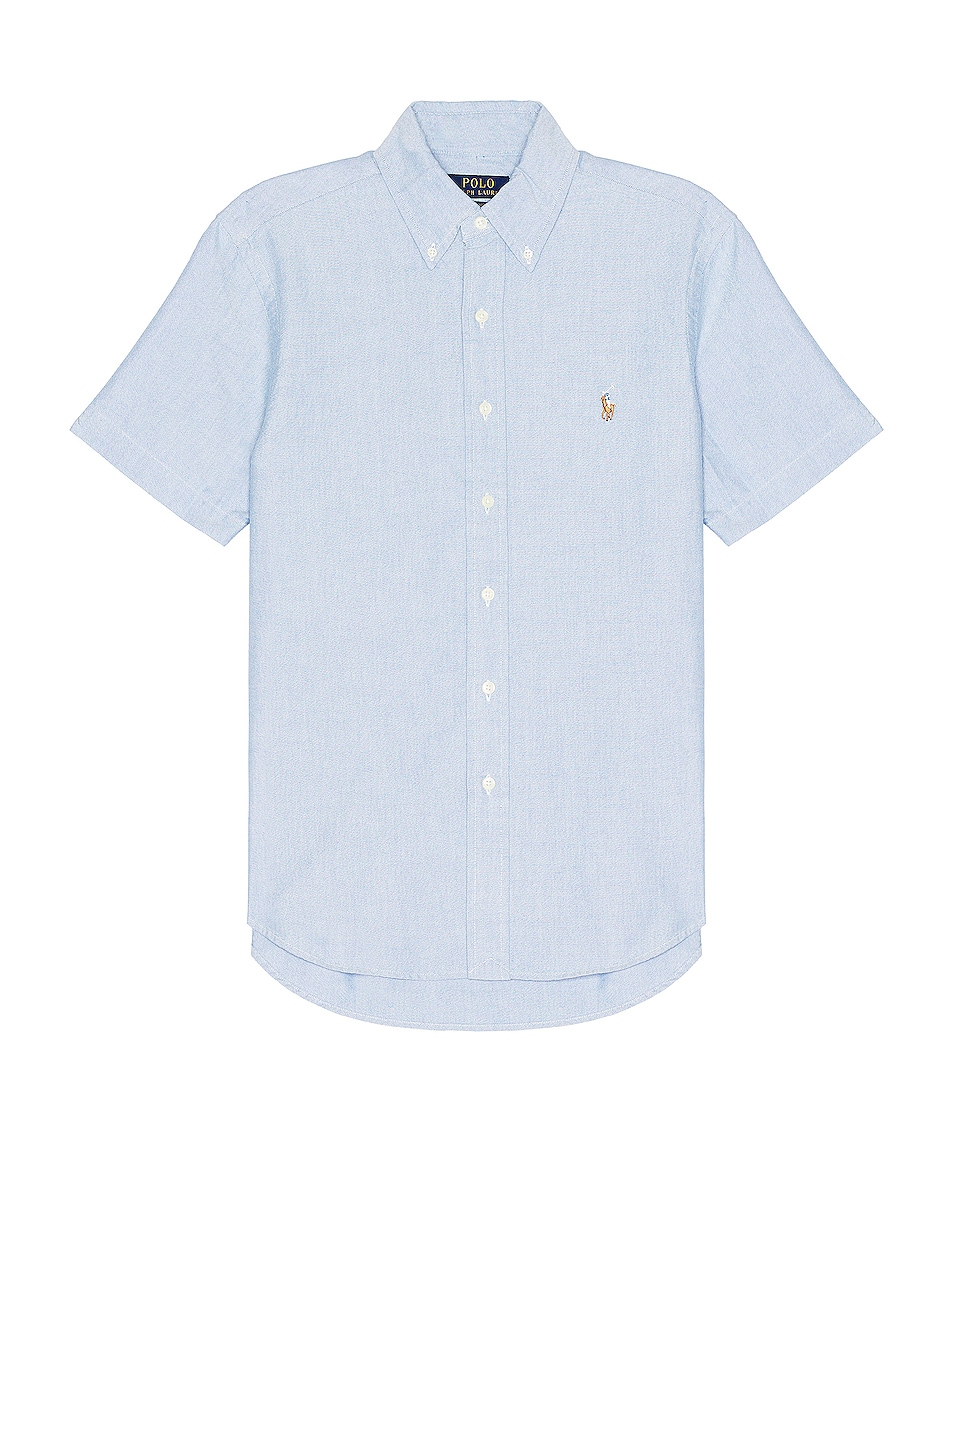 Image 1 of Polo Ralph Lauren Oxford Short Sleeve Shirt in Blue